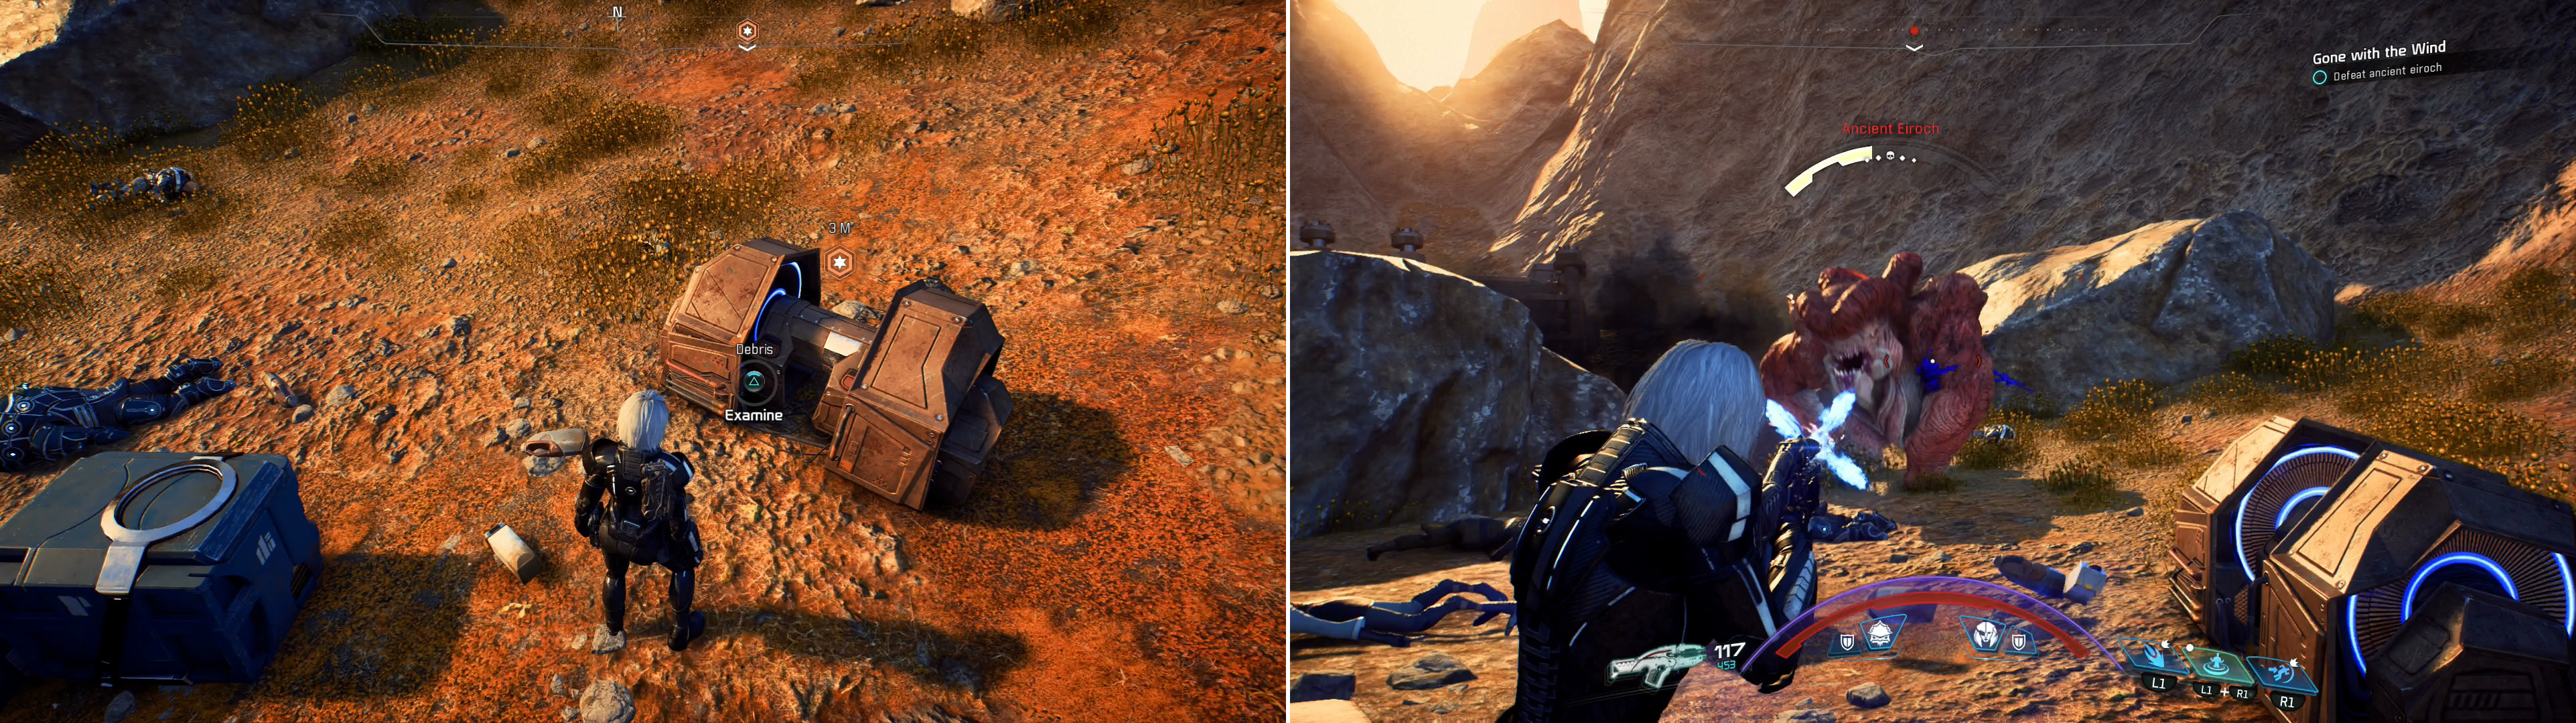 Search the debris at the scavenger camp (left) then defeat the Ancient Eiroch that appears (right).